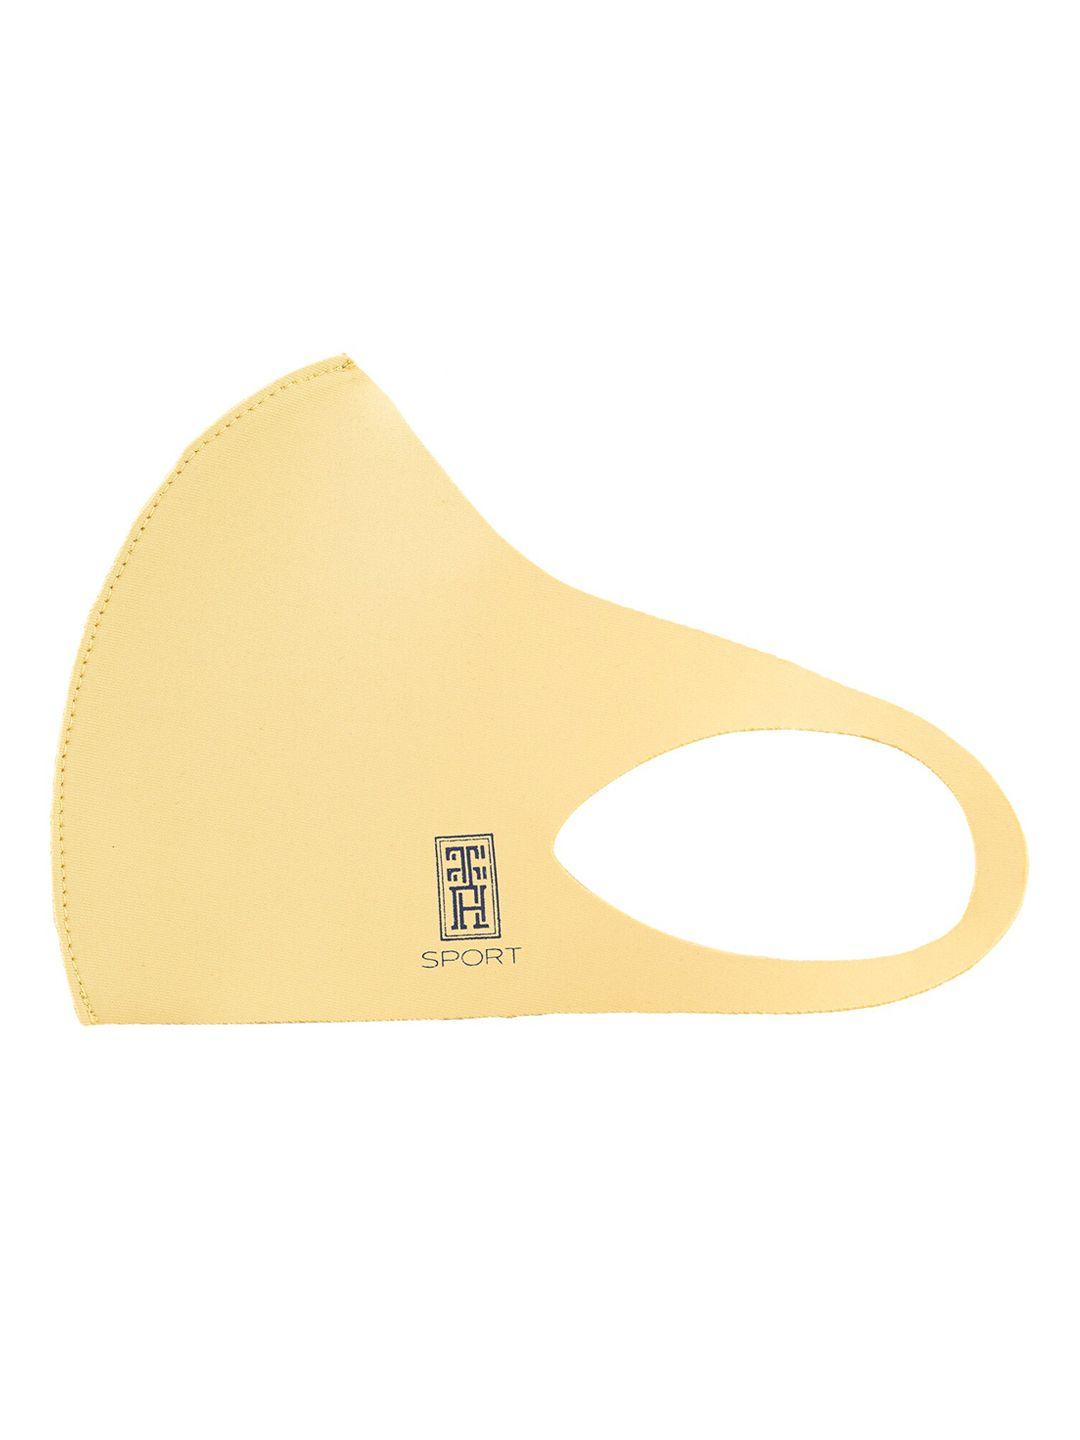 the tie hub kids yellow solid single ply reusable sports outdoor cloth mask